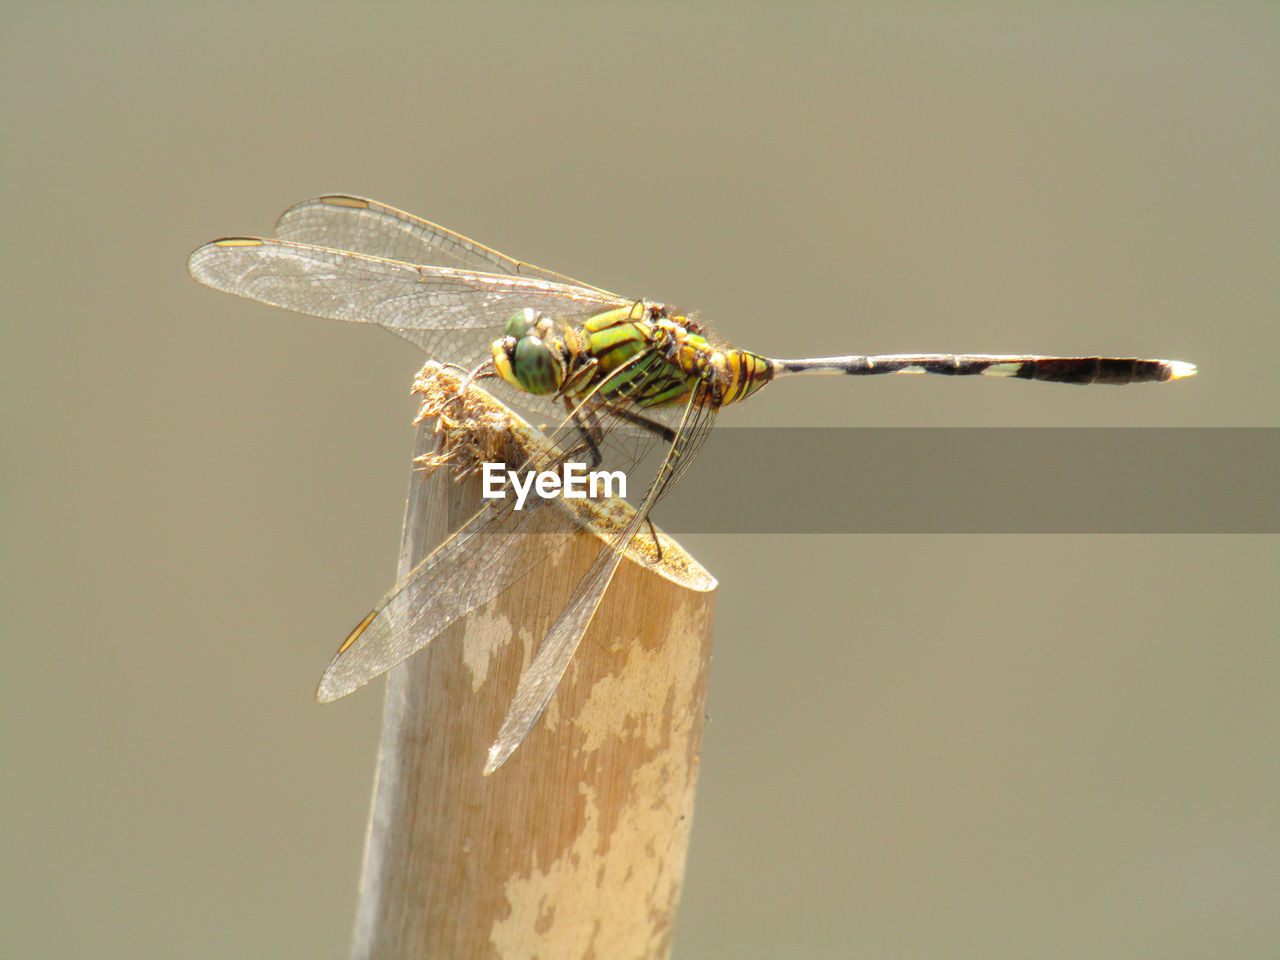 VIEW OF DRAGONFLY ON TWIG